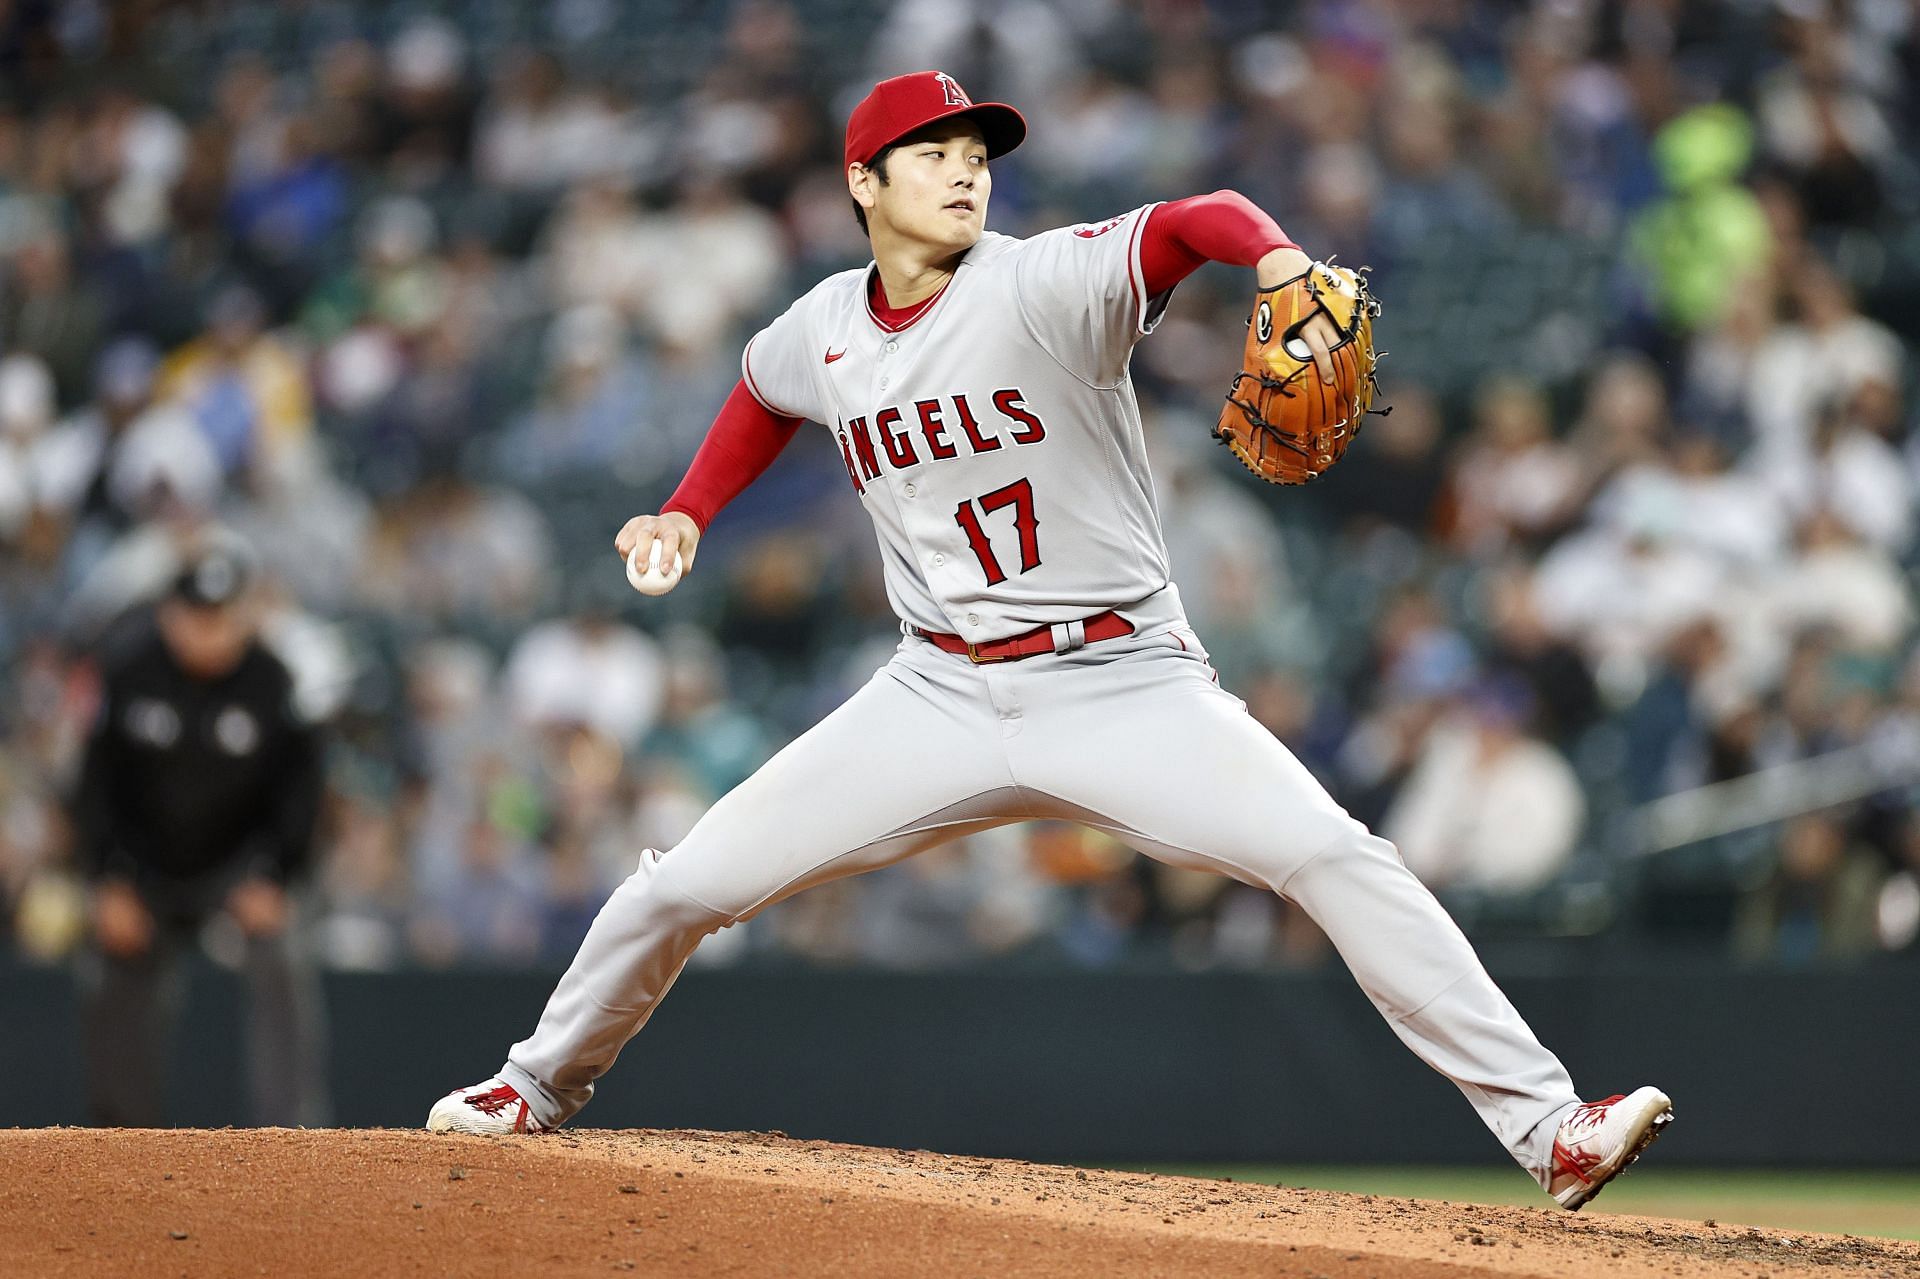 Shohei Ohtani (R) of the Los Angeles Angels hands his protective